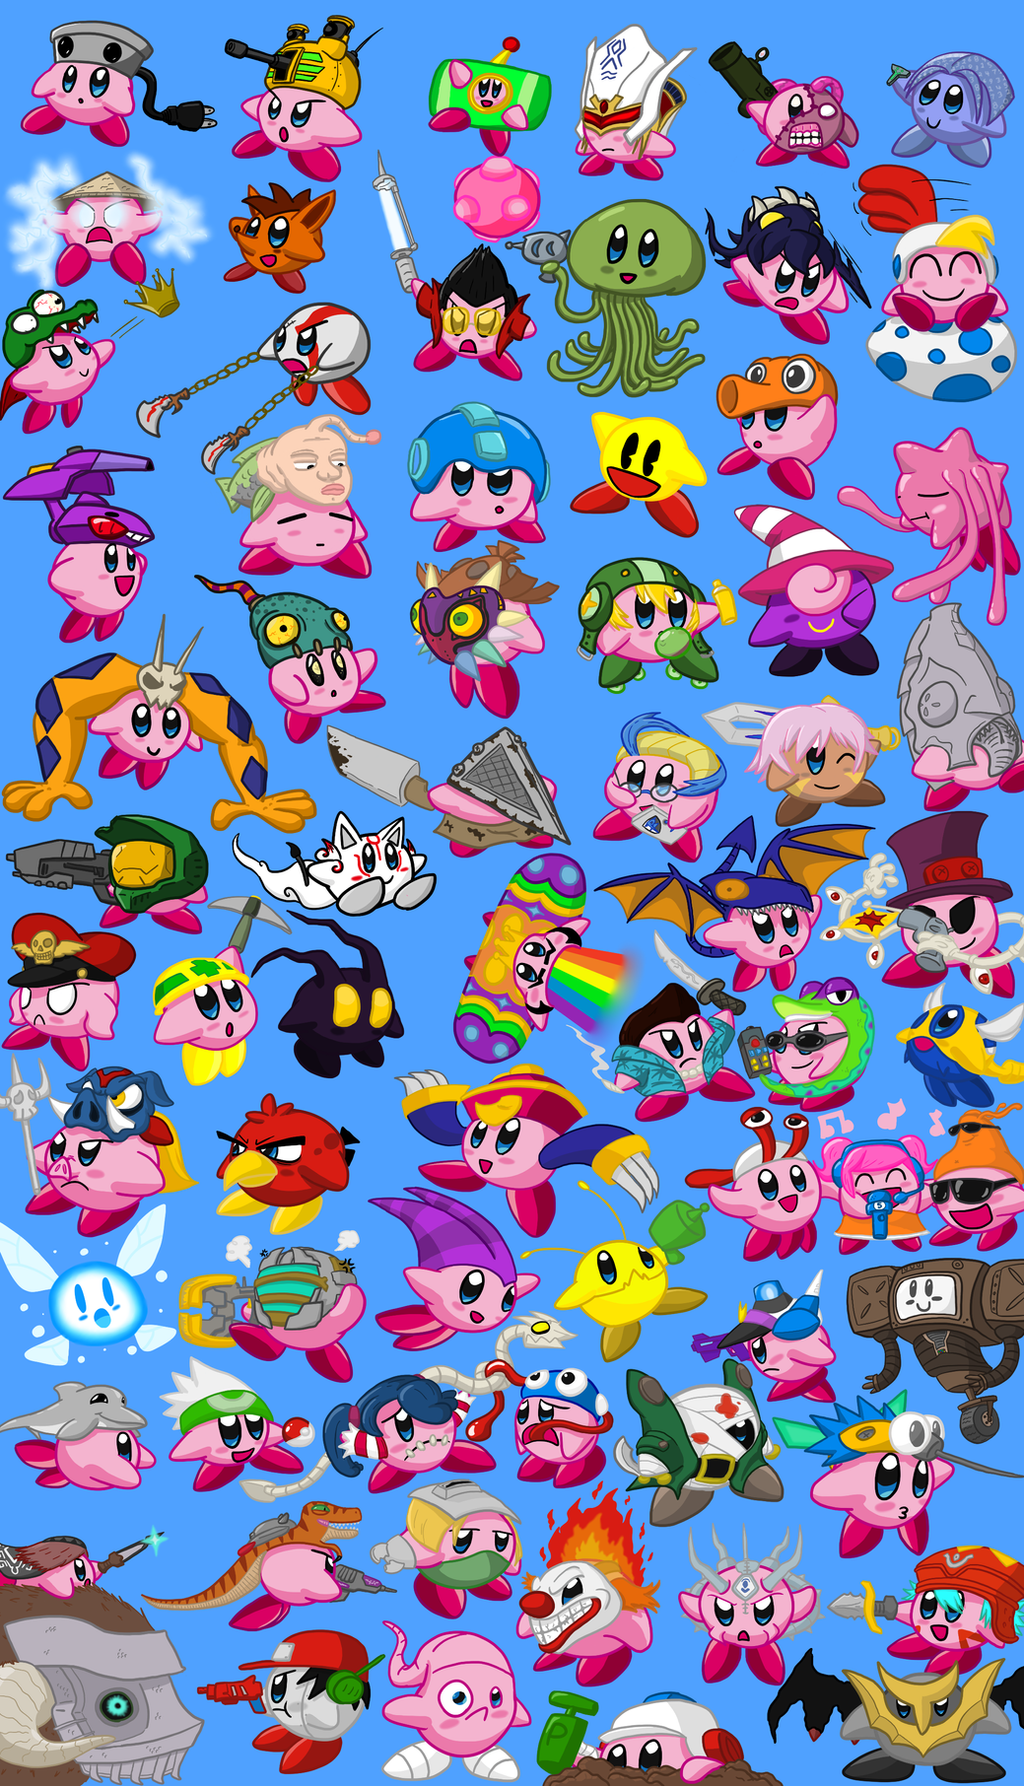 69_amazing_kirby_copy_abilities___by_blargen69-d5wtwkh.png